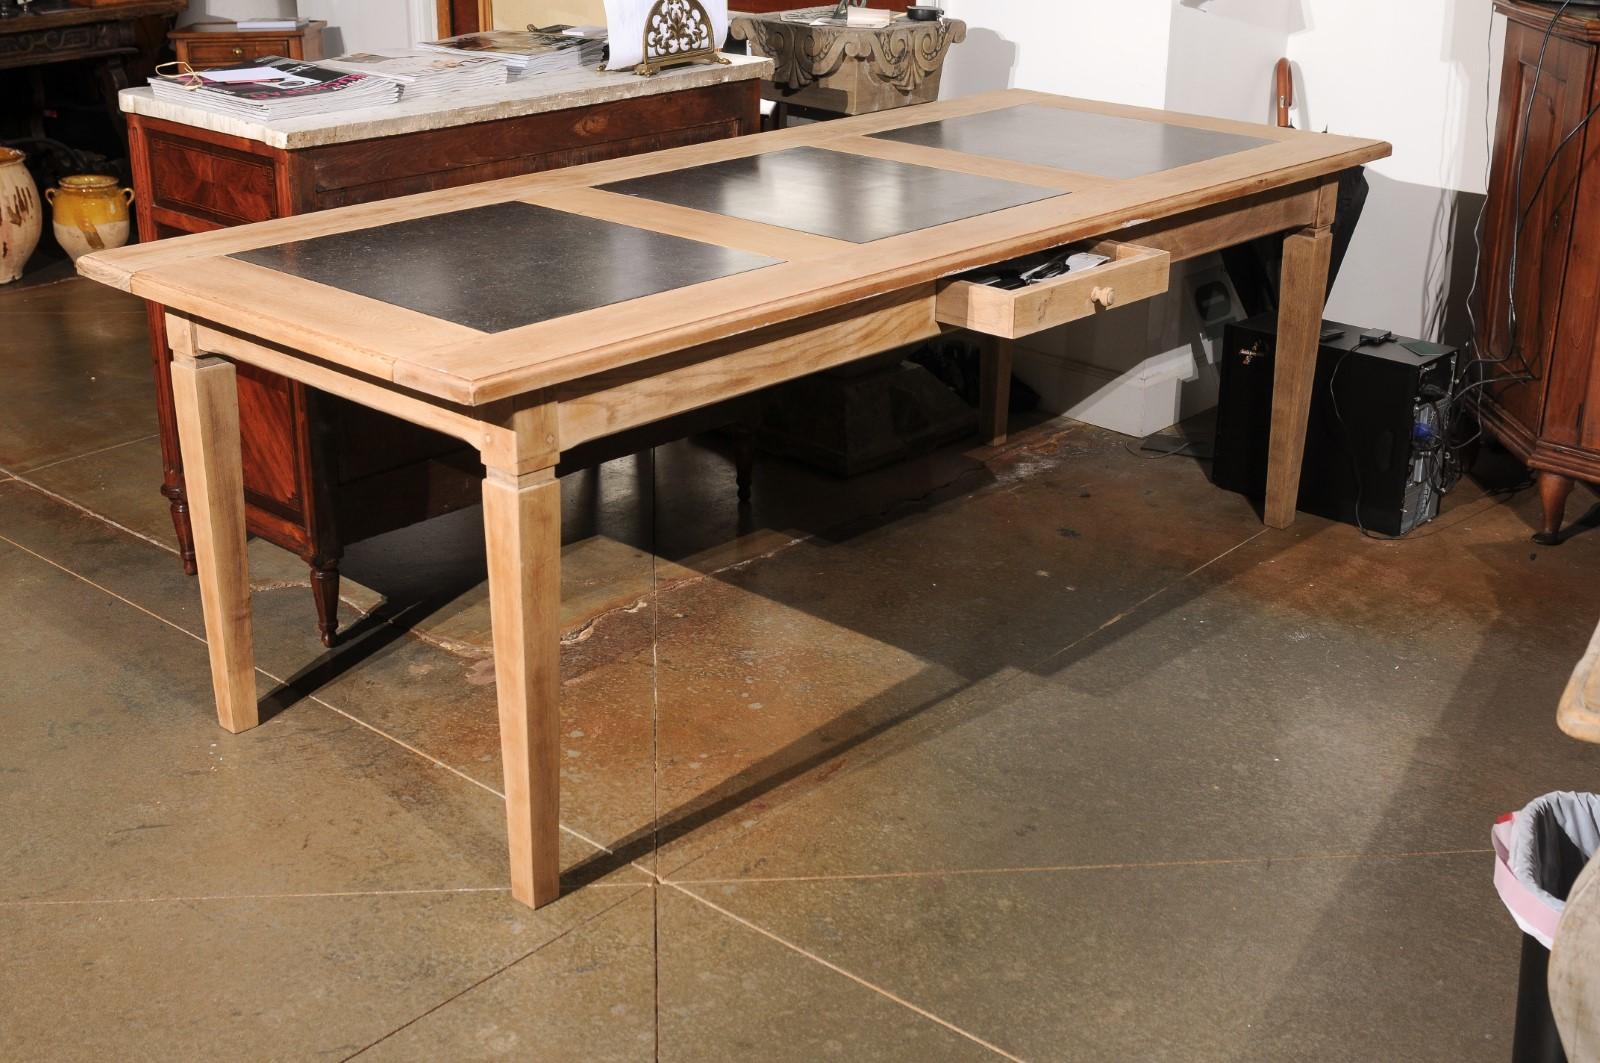 Southern French Midcentury Natural Oak Dining Table with Fossil Black Marble Top For Sale 1